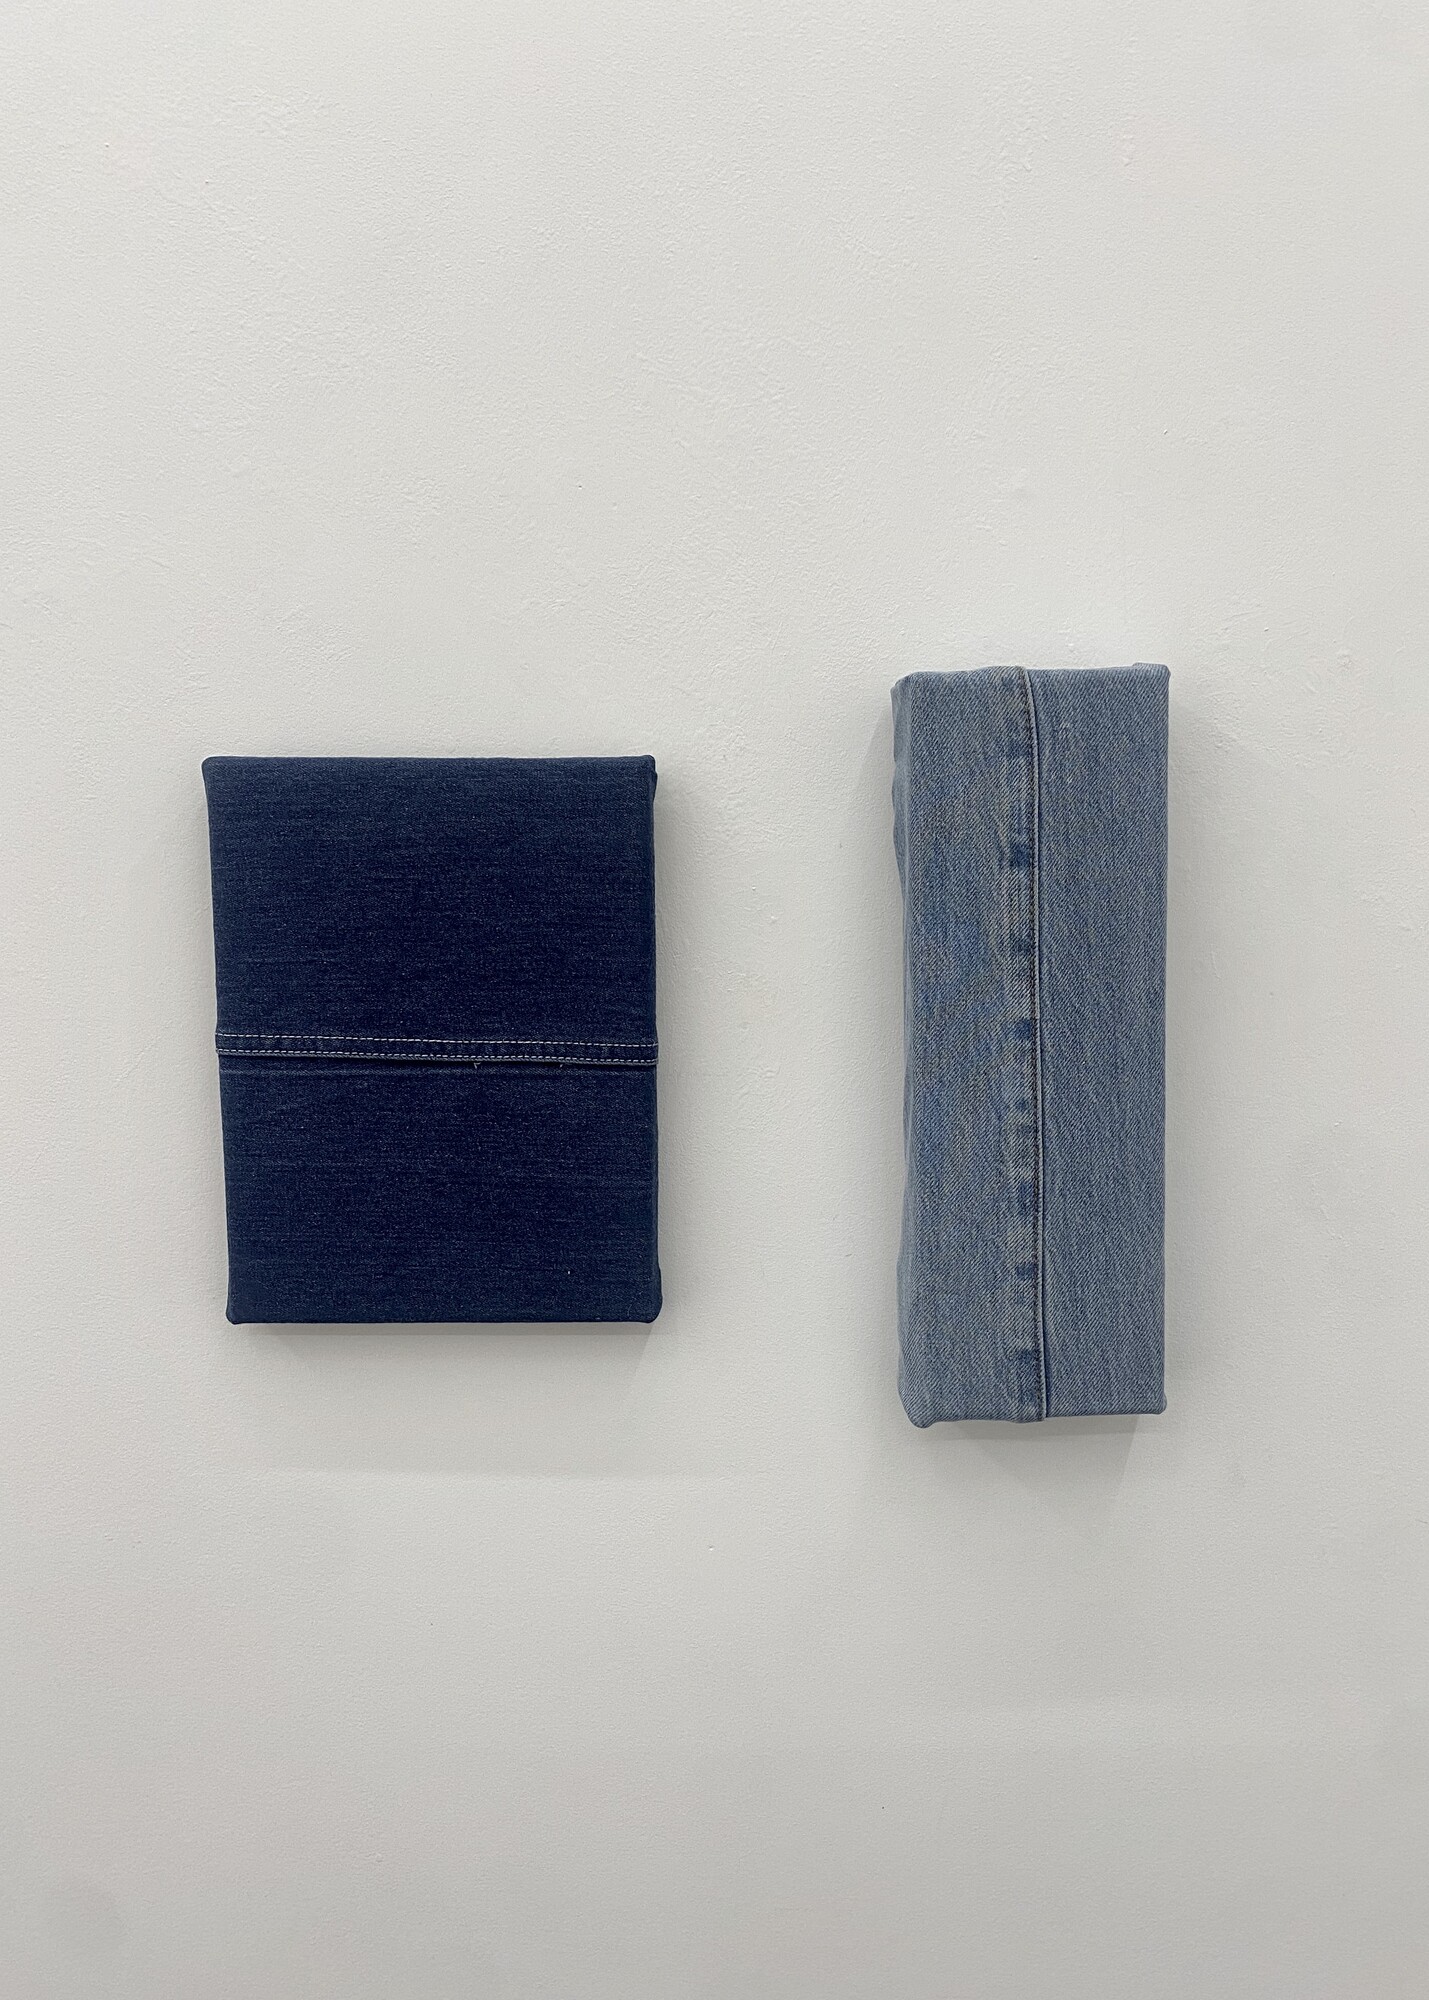 Isabella Darcy, <em>Untitled (stitch)</em>, 2022. Denim jeans over canvas. Conners Conners Gallery; <em>Untitled (stitch)</em>, 2022. Denim jeans over canvas. Conners Conners Gallery